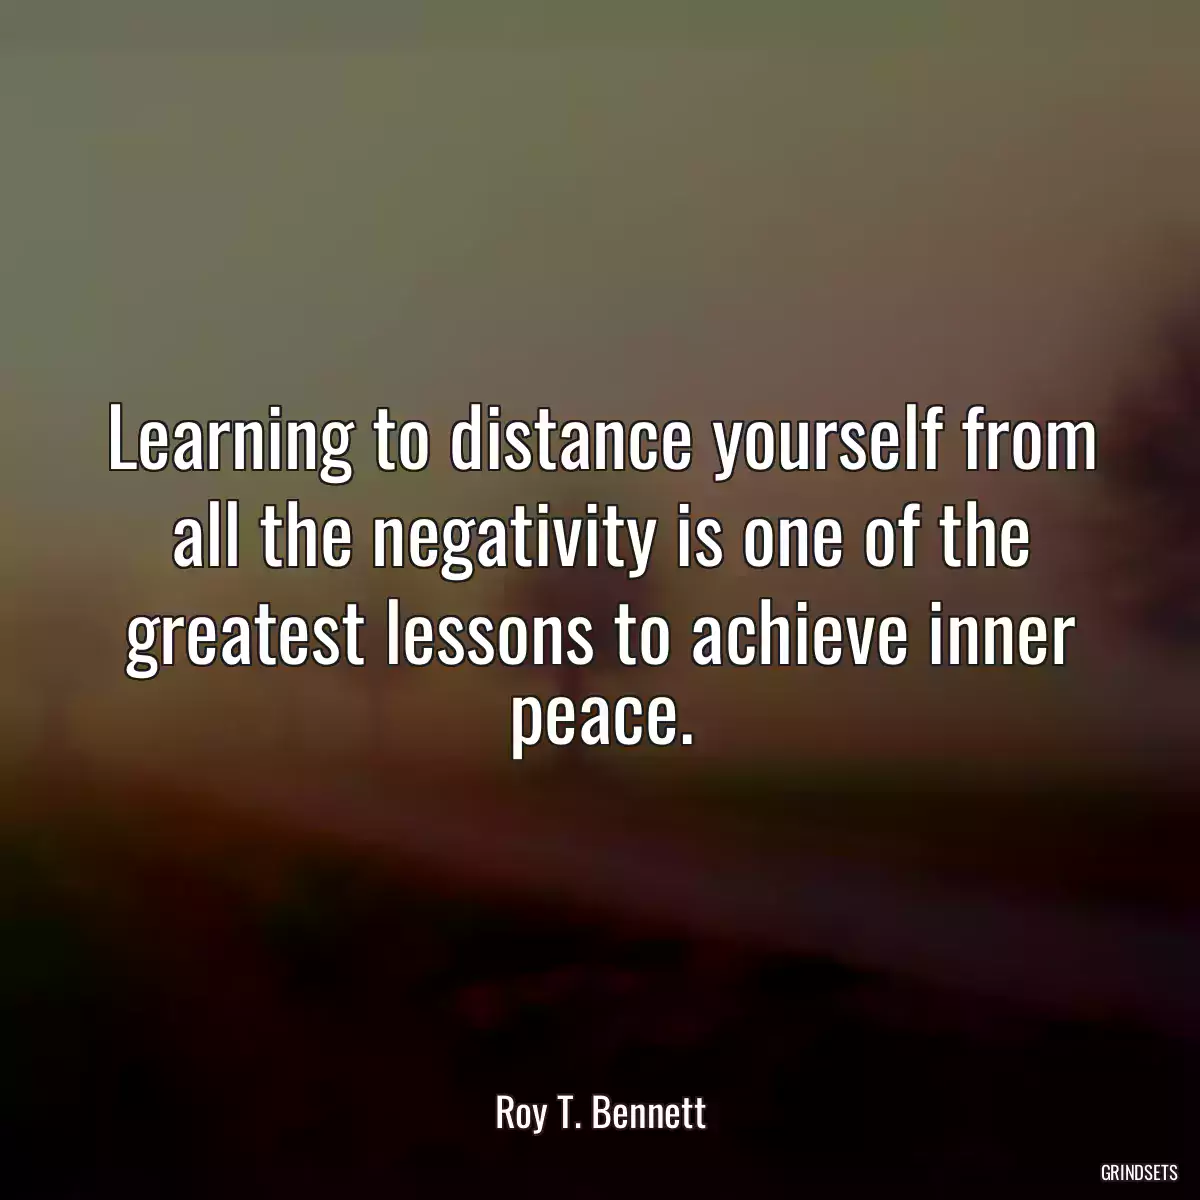 Learning to distance yourself from all the negativity is one of the greatest lessons to achieve inner peace.